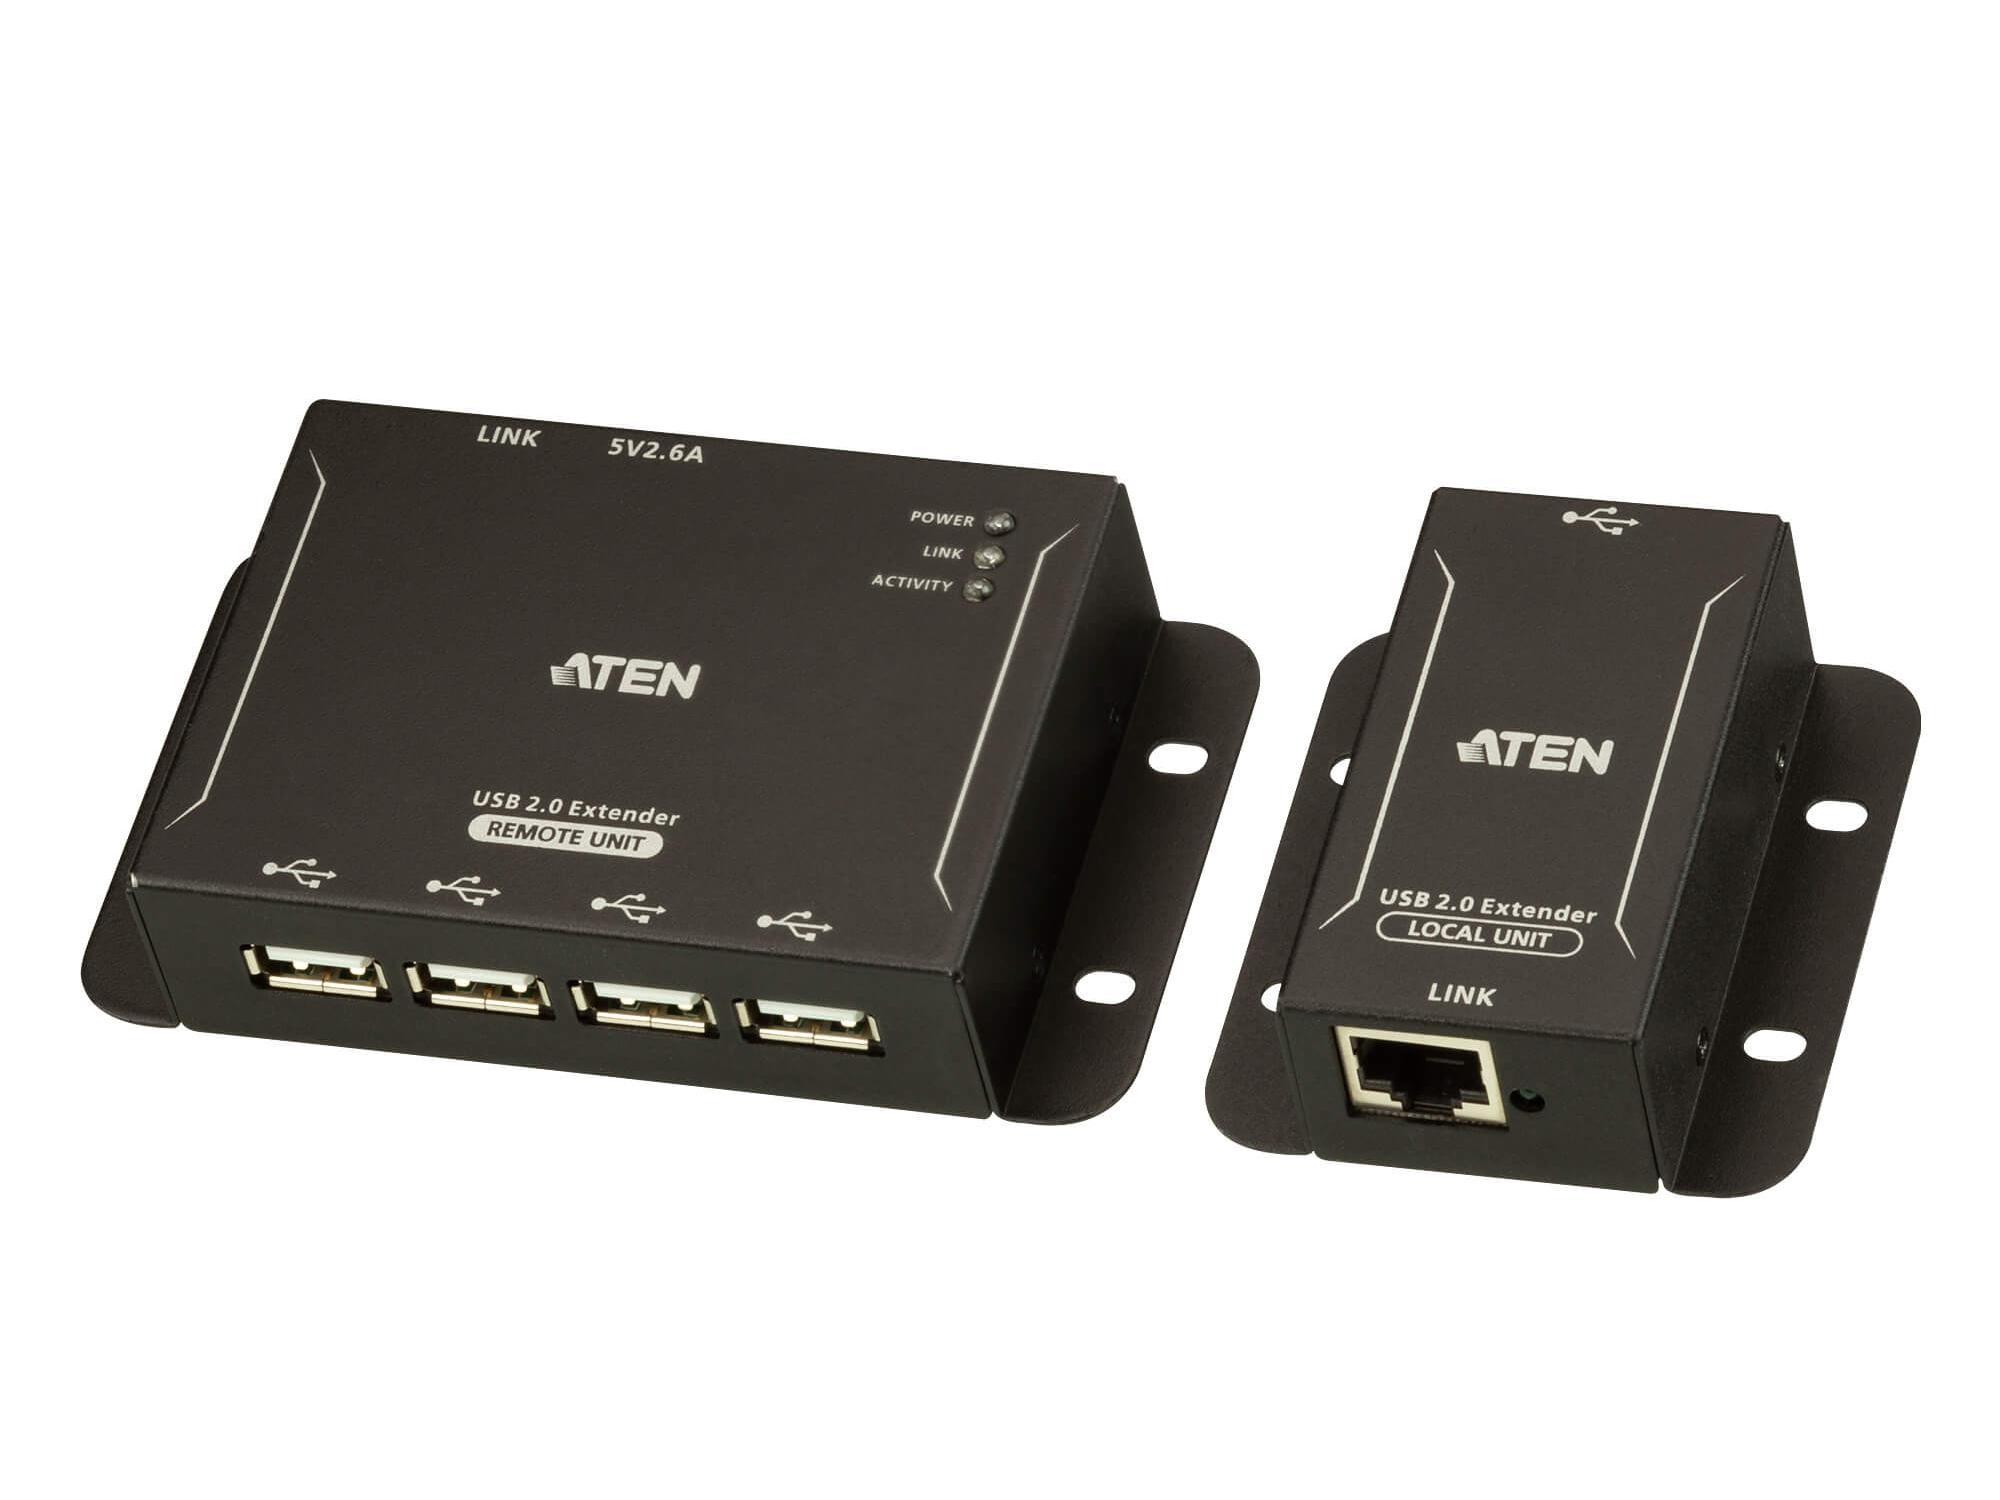 UCE3250 4-port USB 2.0 CAT 5 Extender (Transmitter/Receiver) Set/up to 50m by Aten